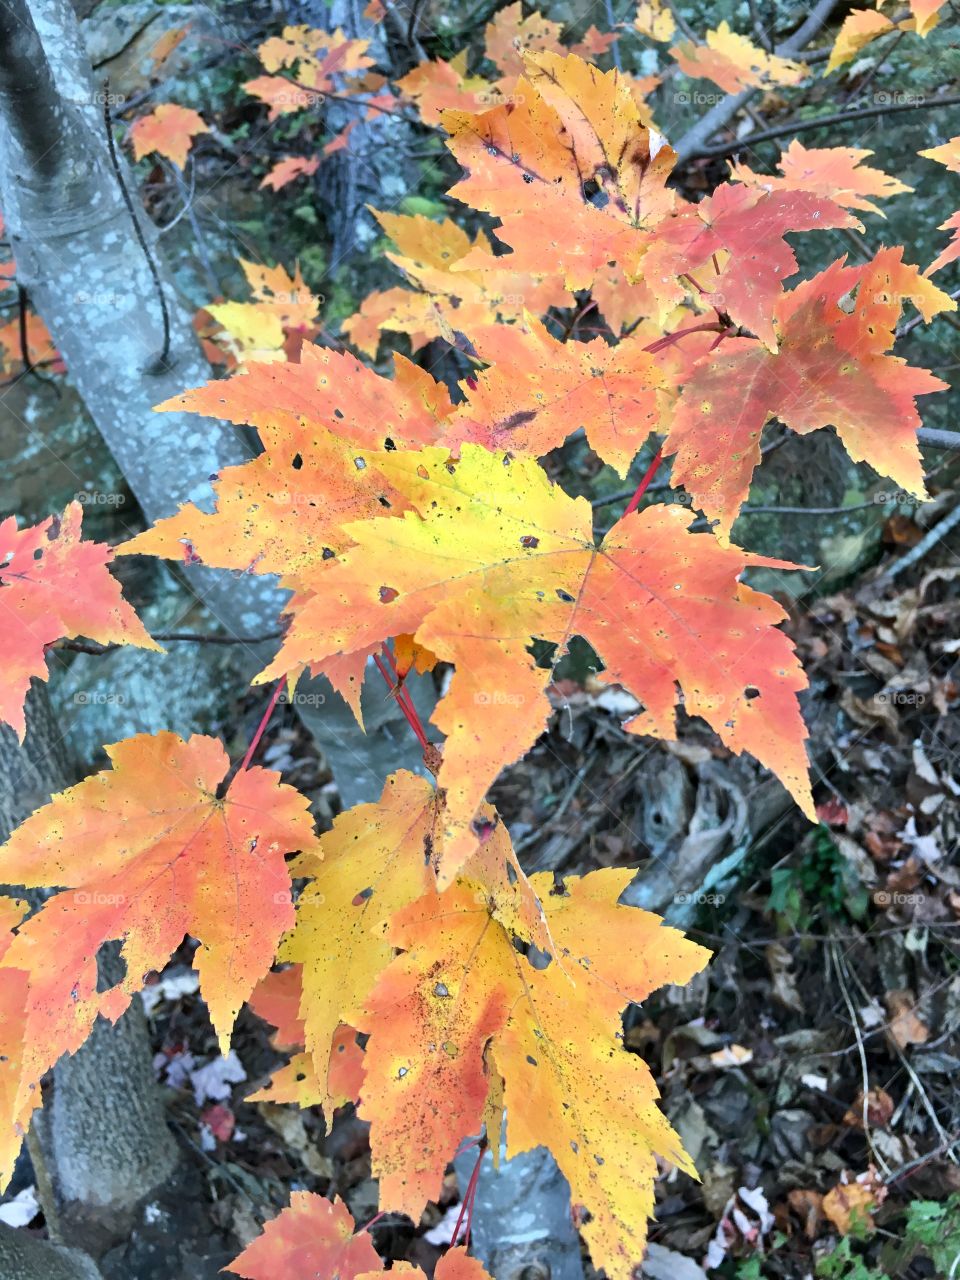 Fall color